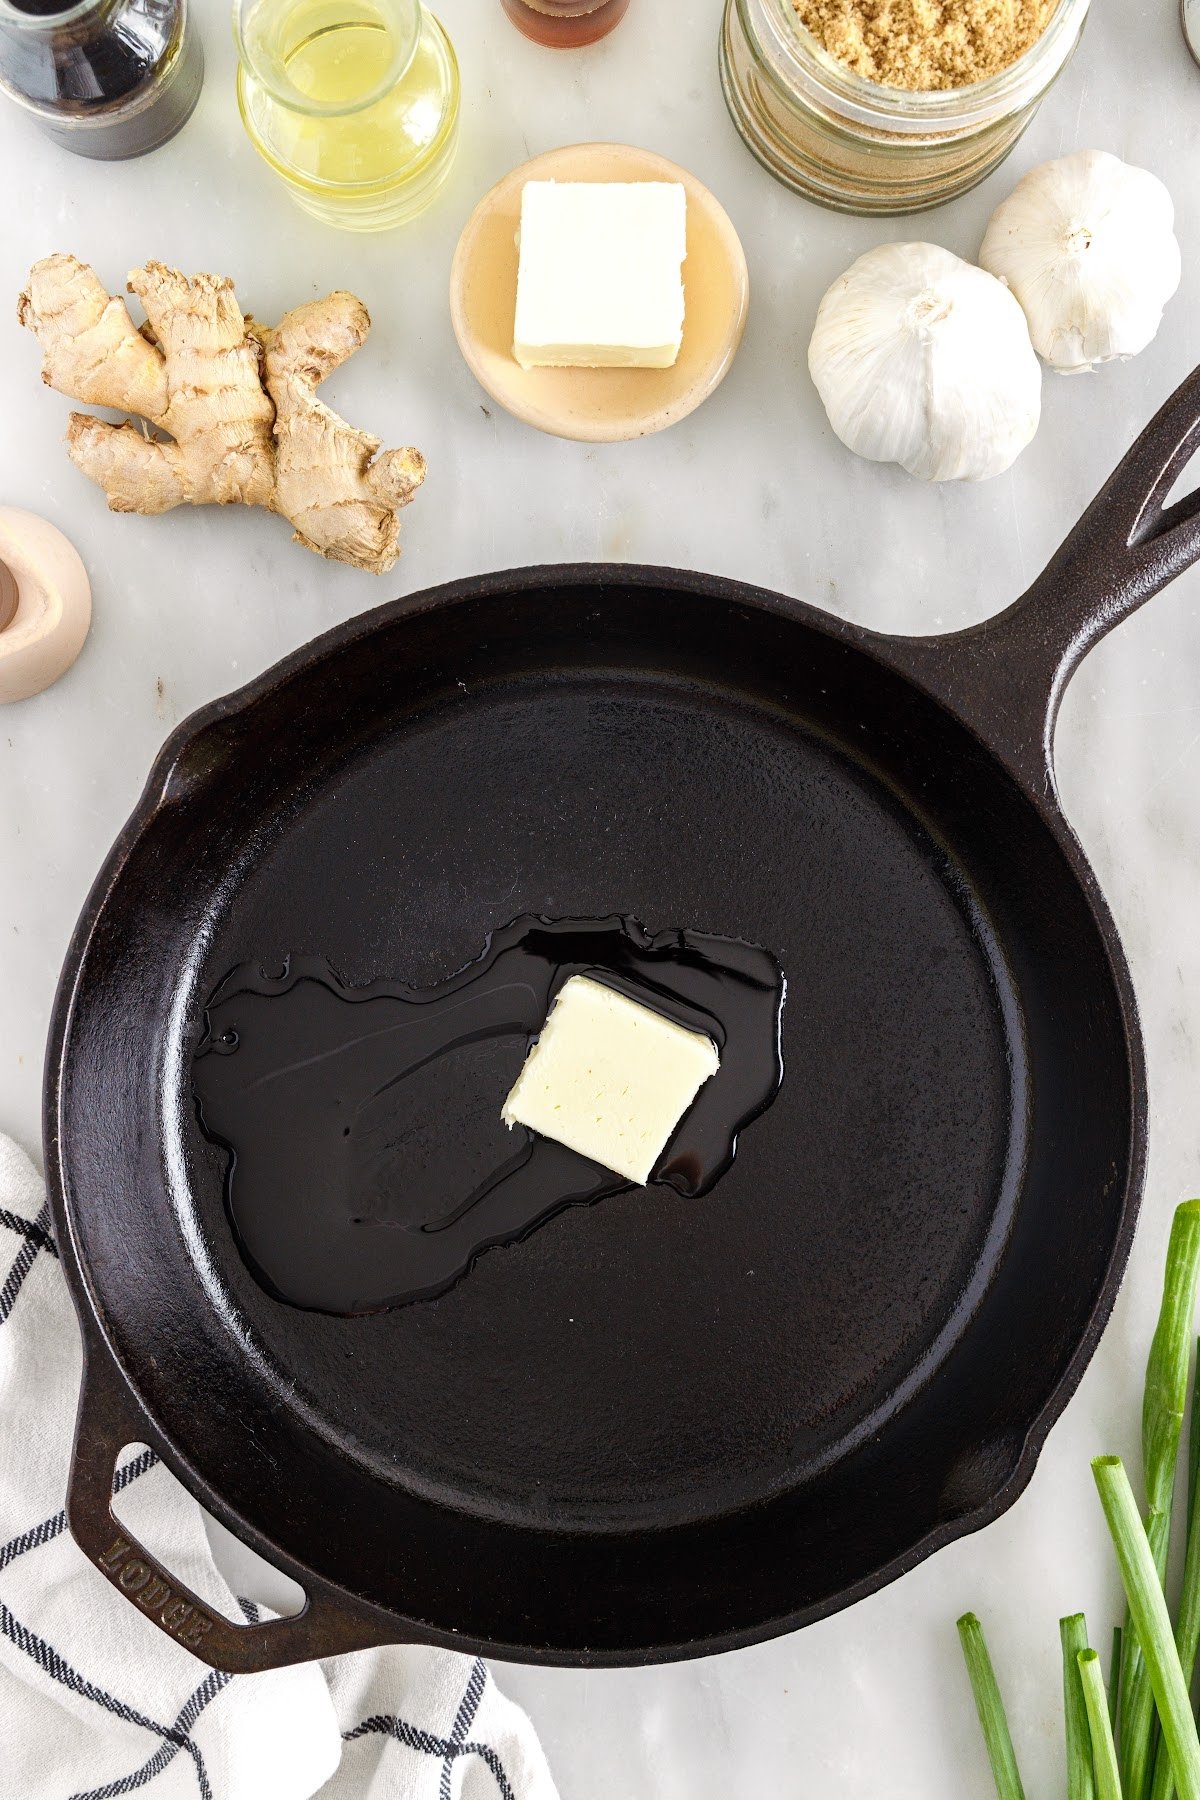 Melting the butter over the skillet.